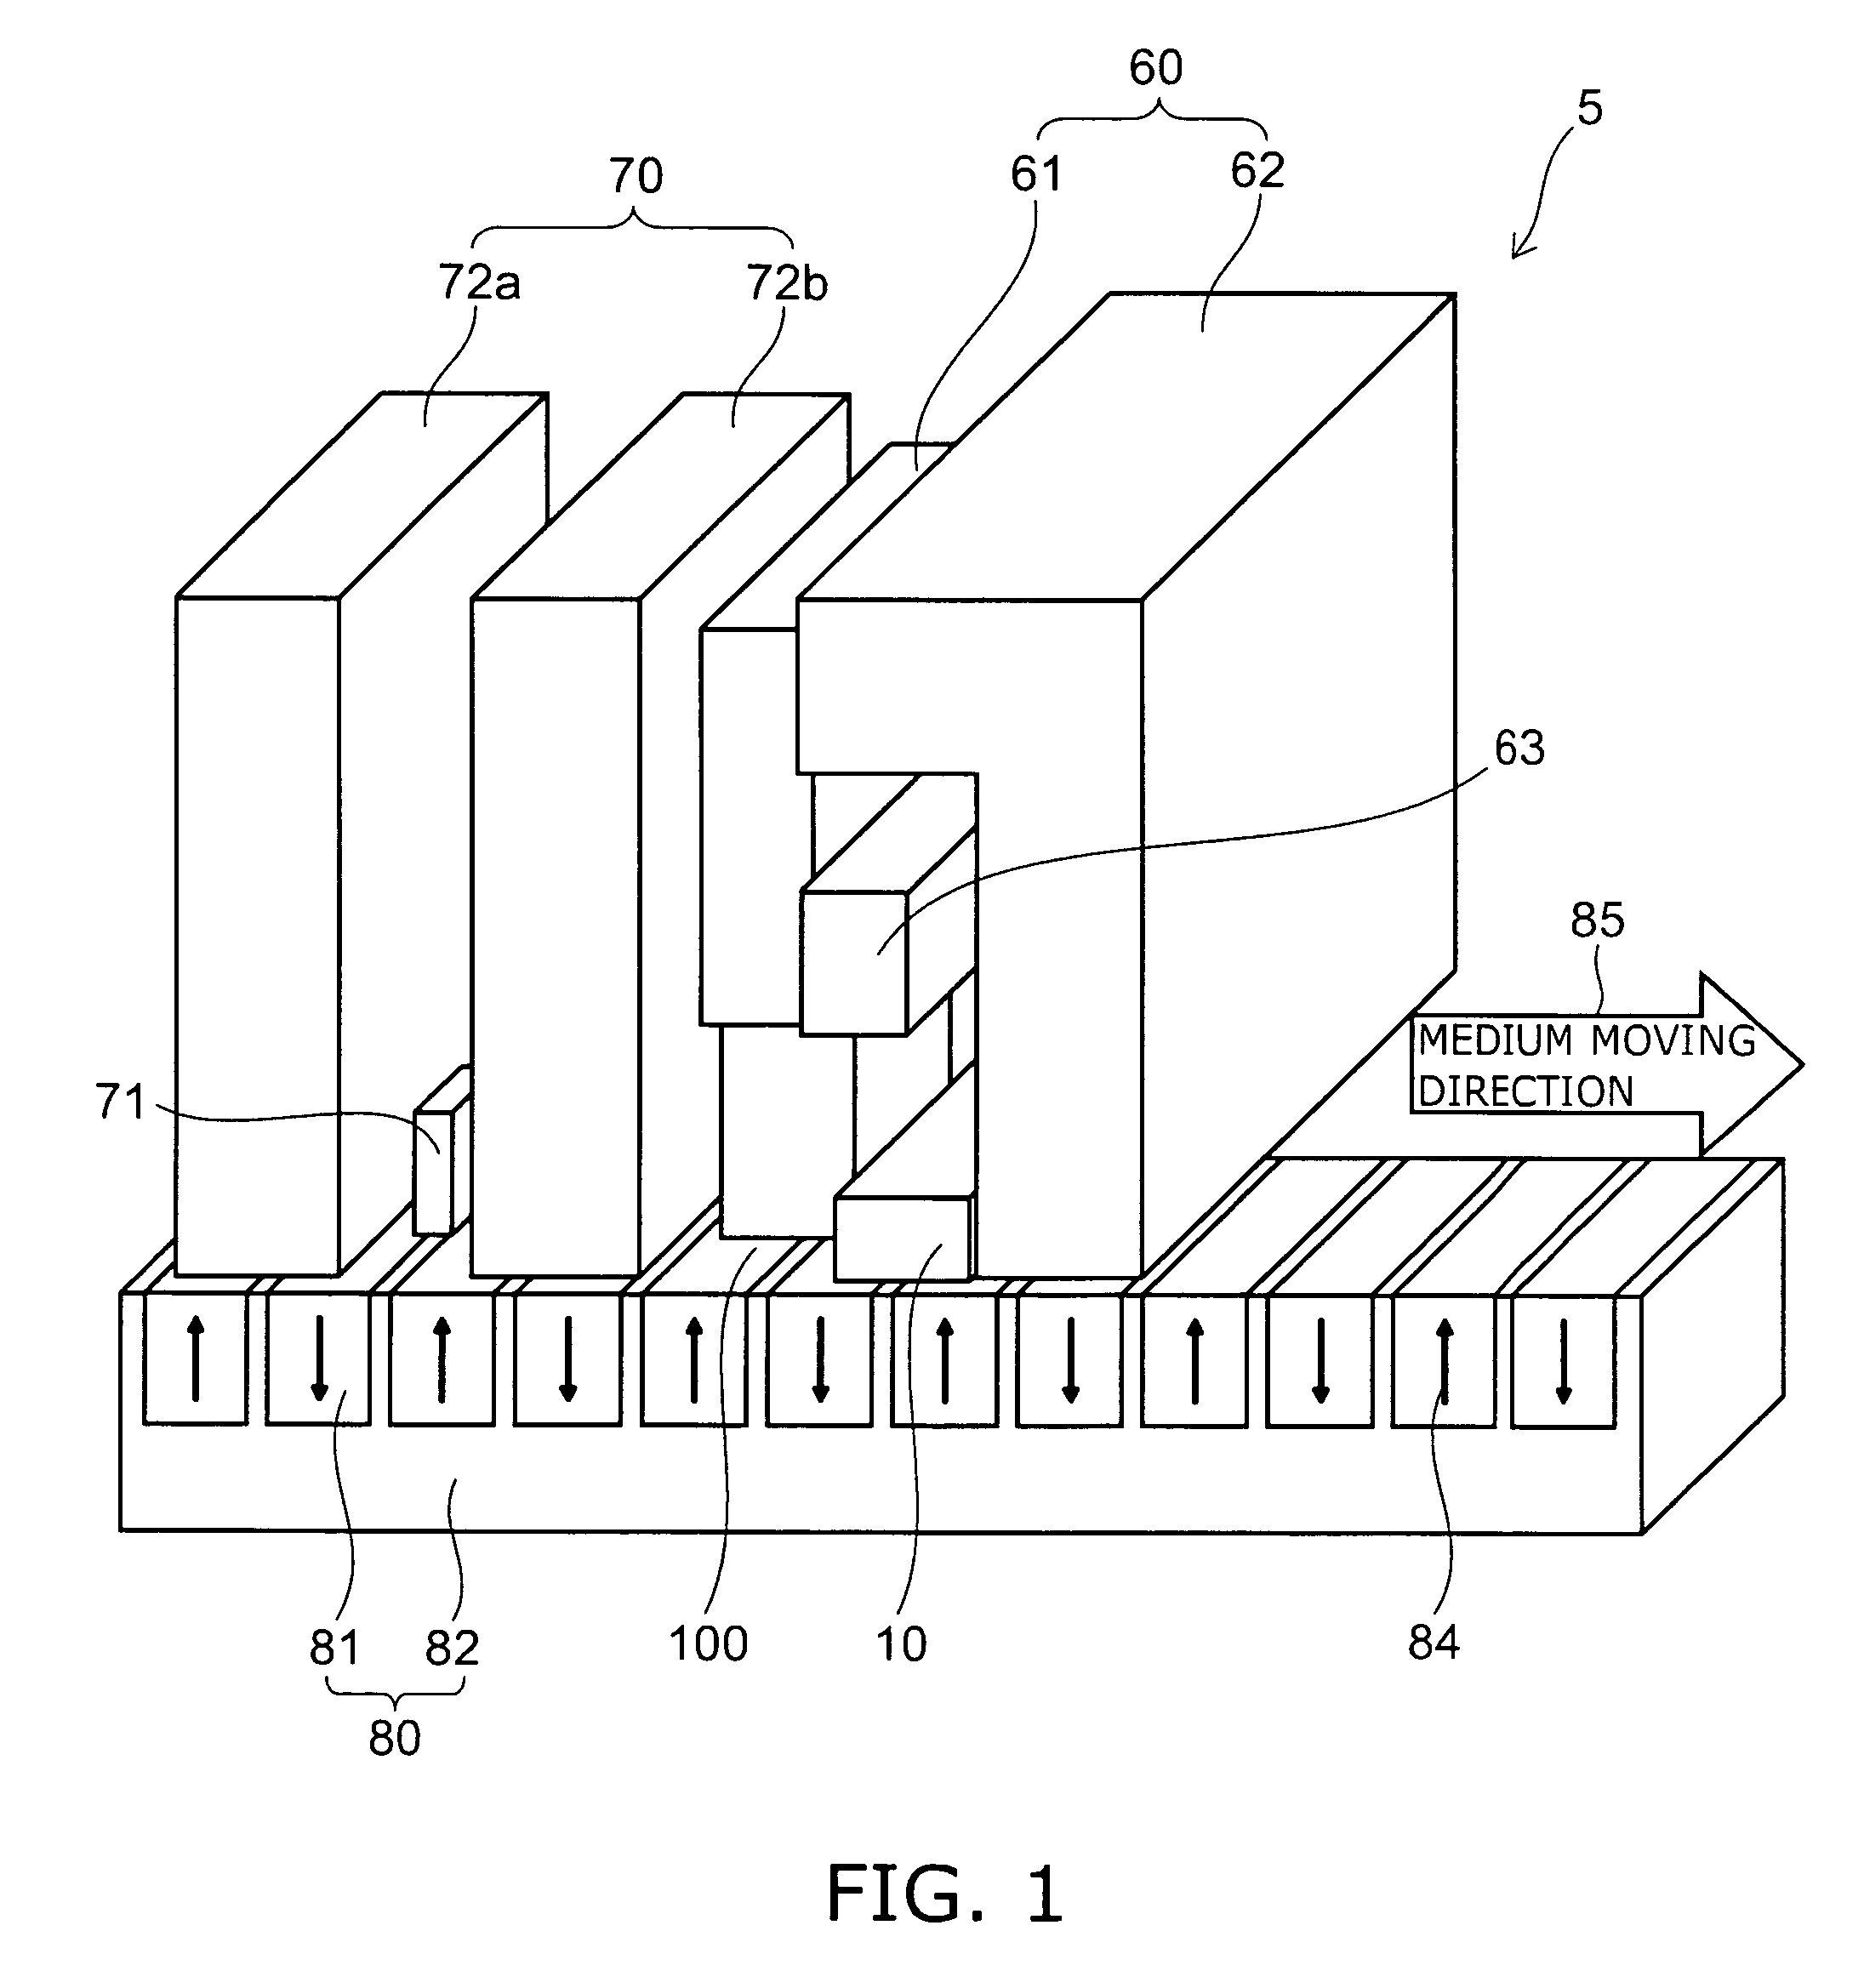 Magnetic recording head with protruding spin torque oscillator